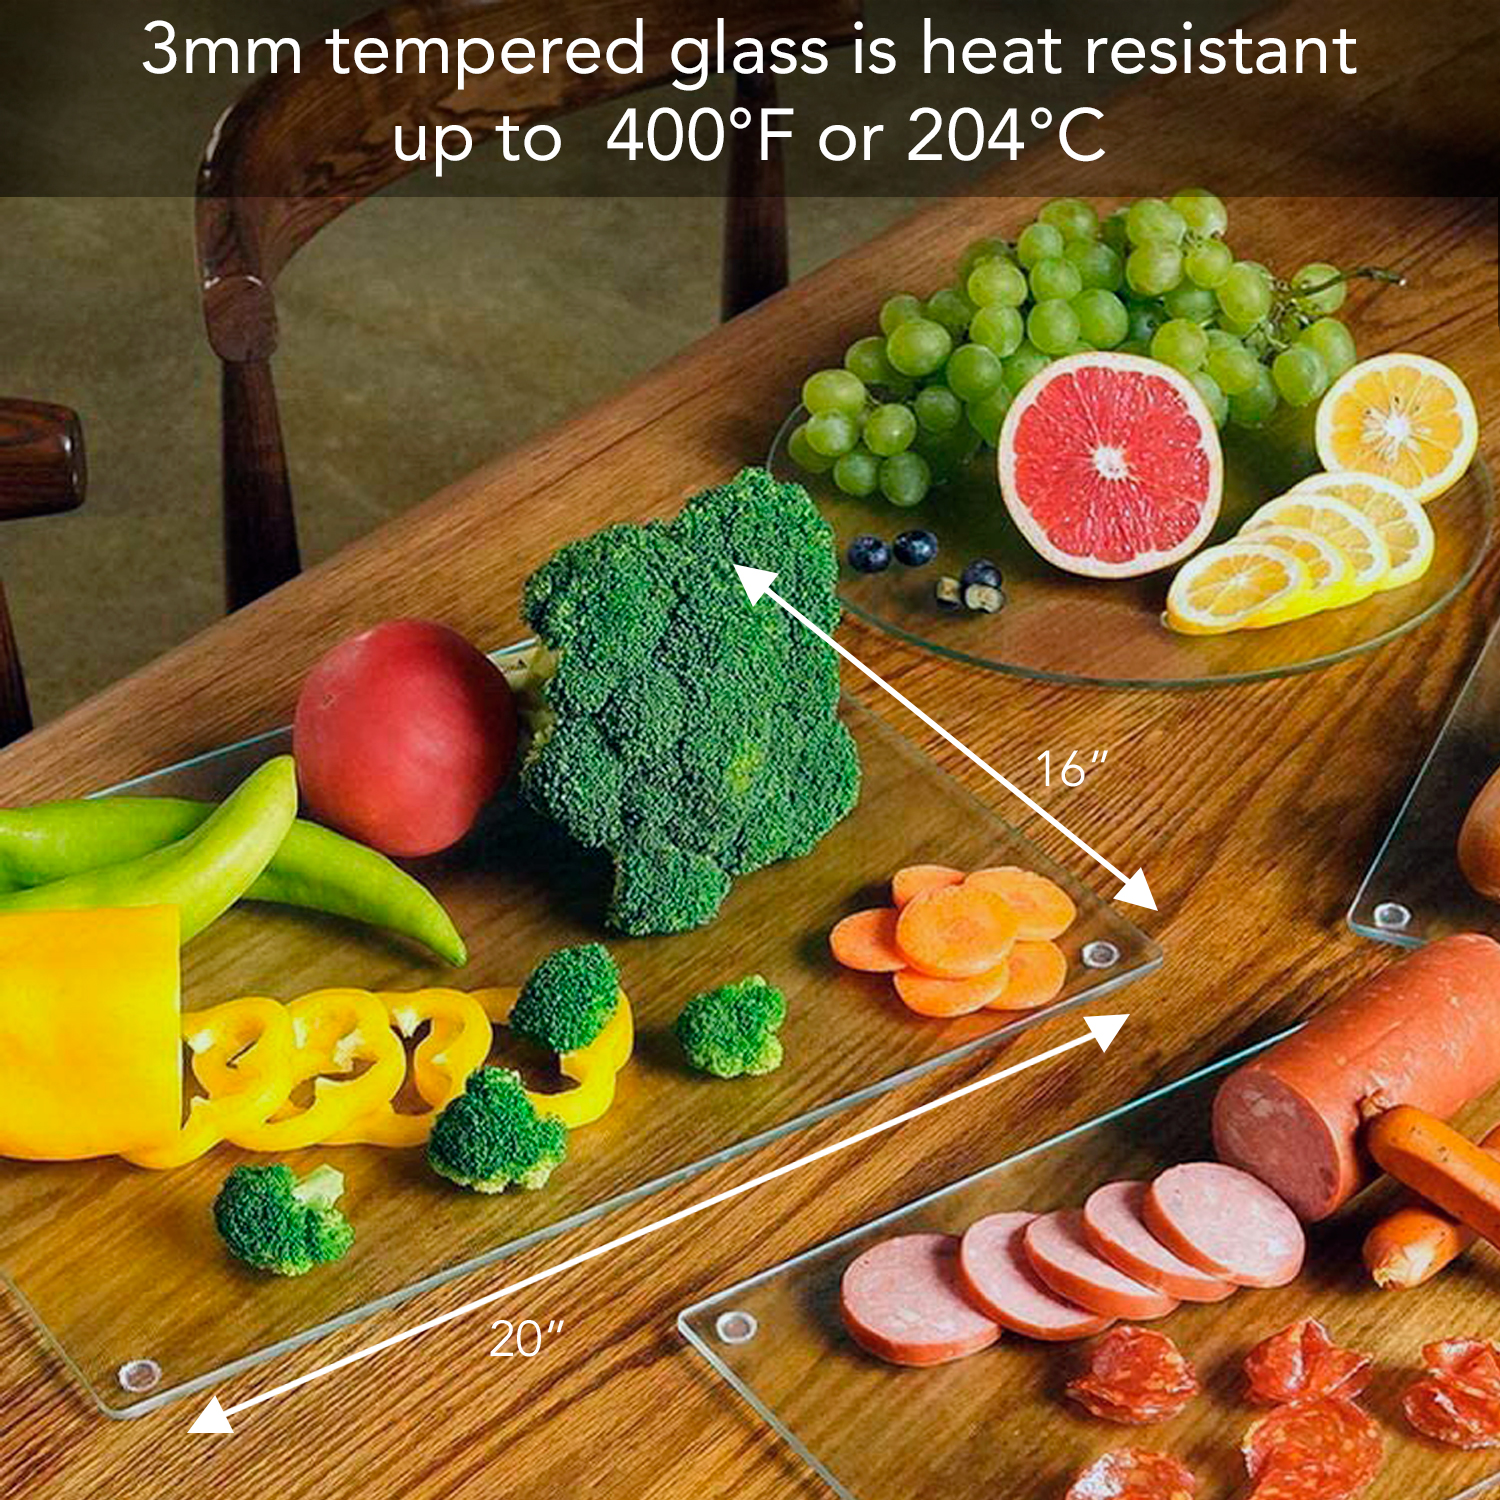 CounterArt Lightly Frosted 3mm Heat Tolerant Glass Cutting Board 20" by 16" - image 2 of 6